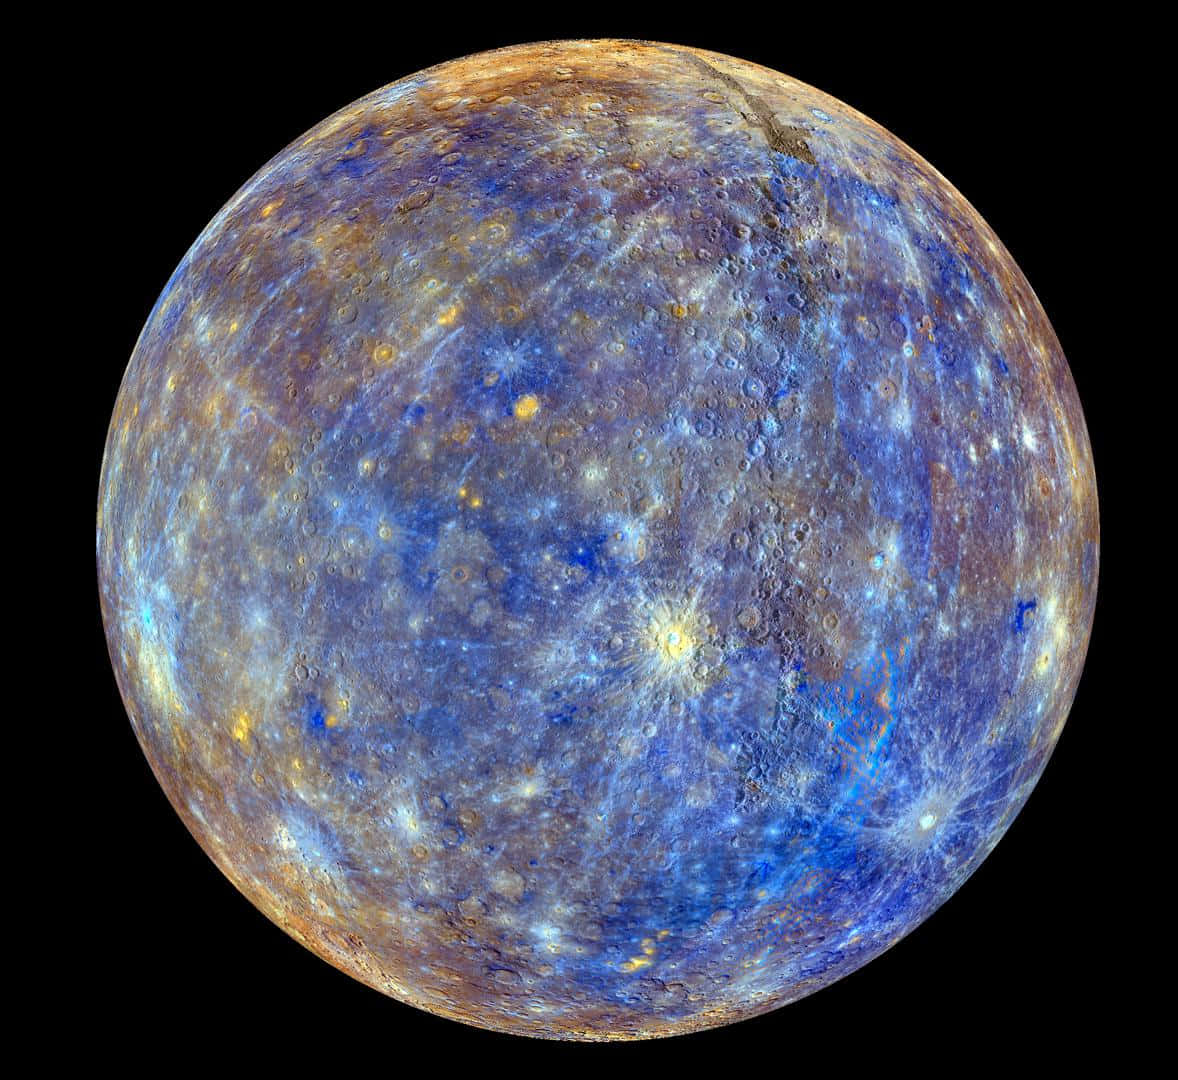 A close-up of the planet Mercury, from space.